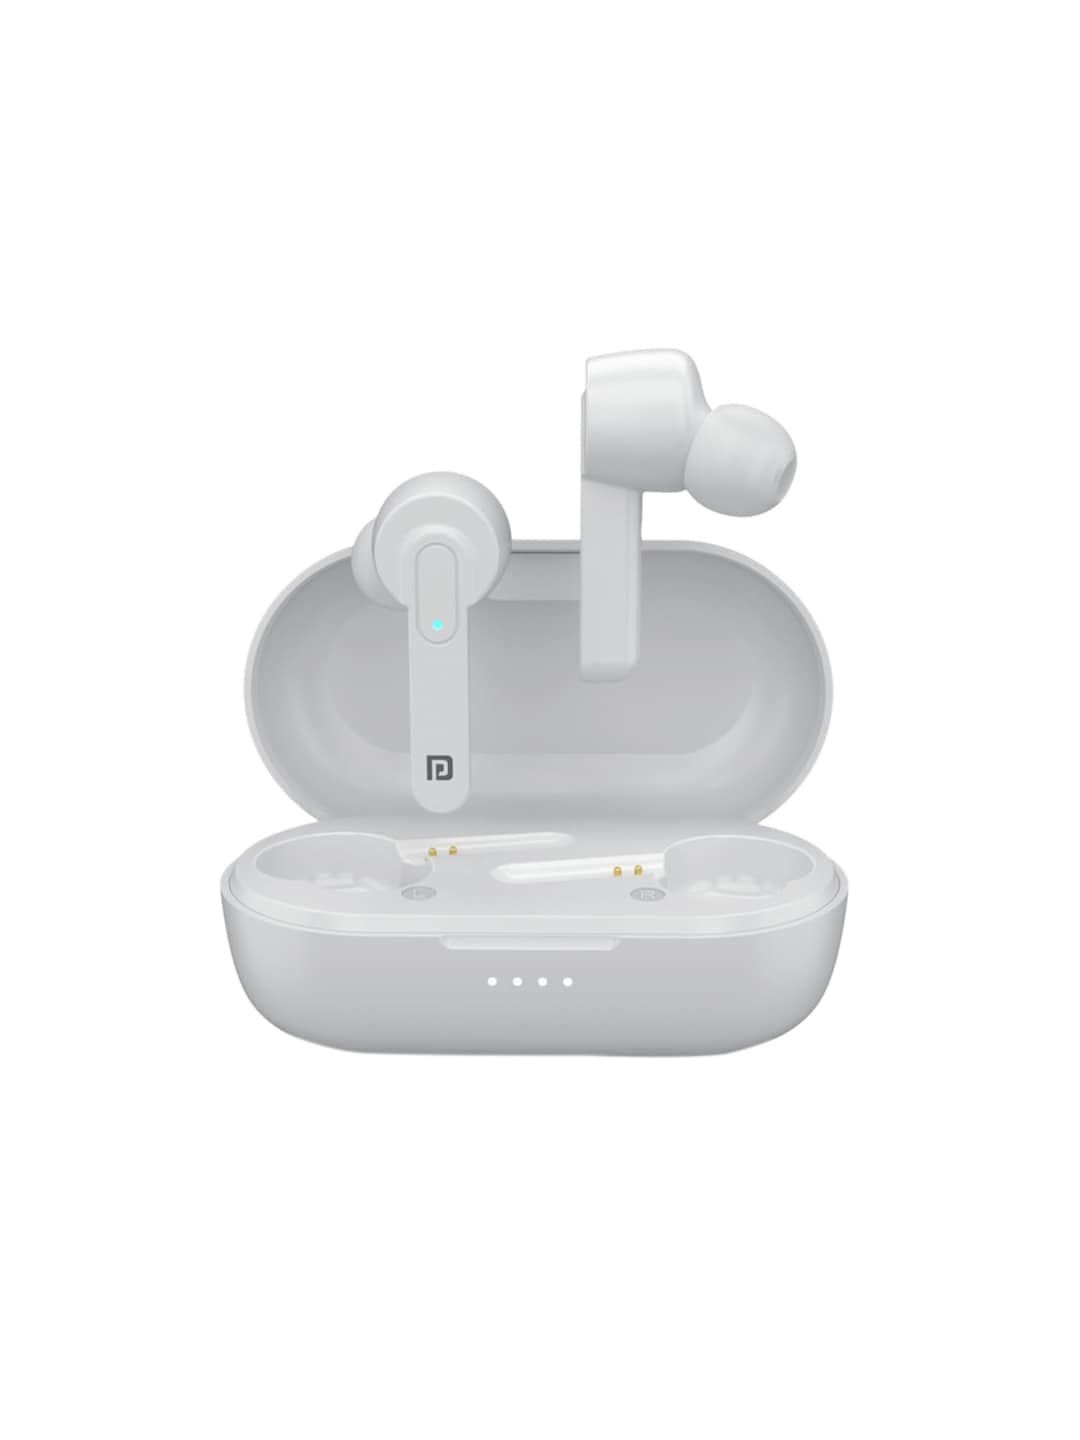 Portronics White Solid Harmonics Twins 24 Smart TWS Earbuds Price in India